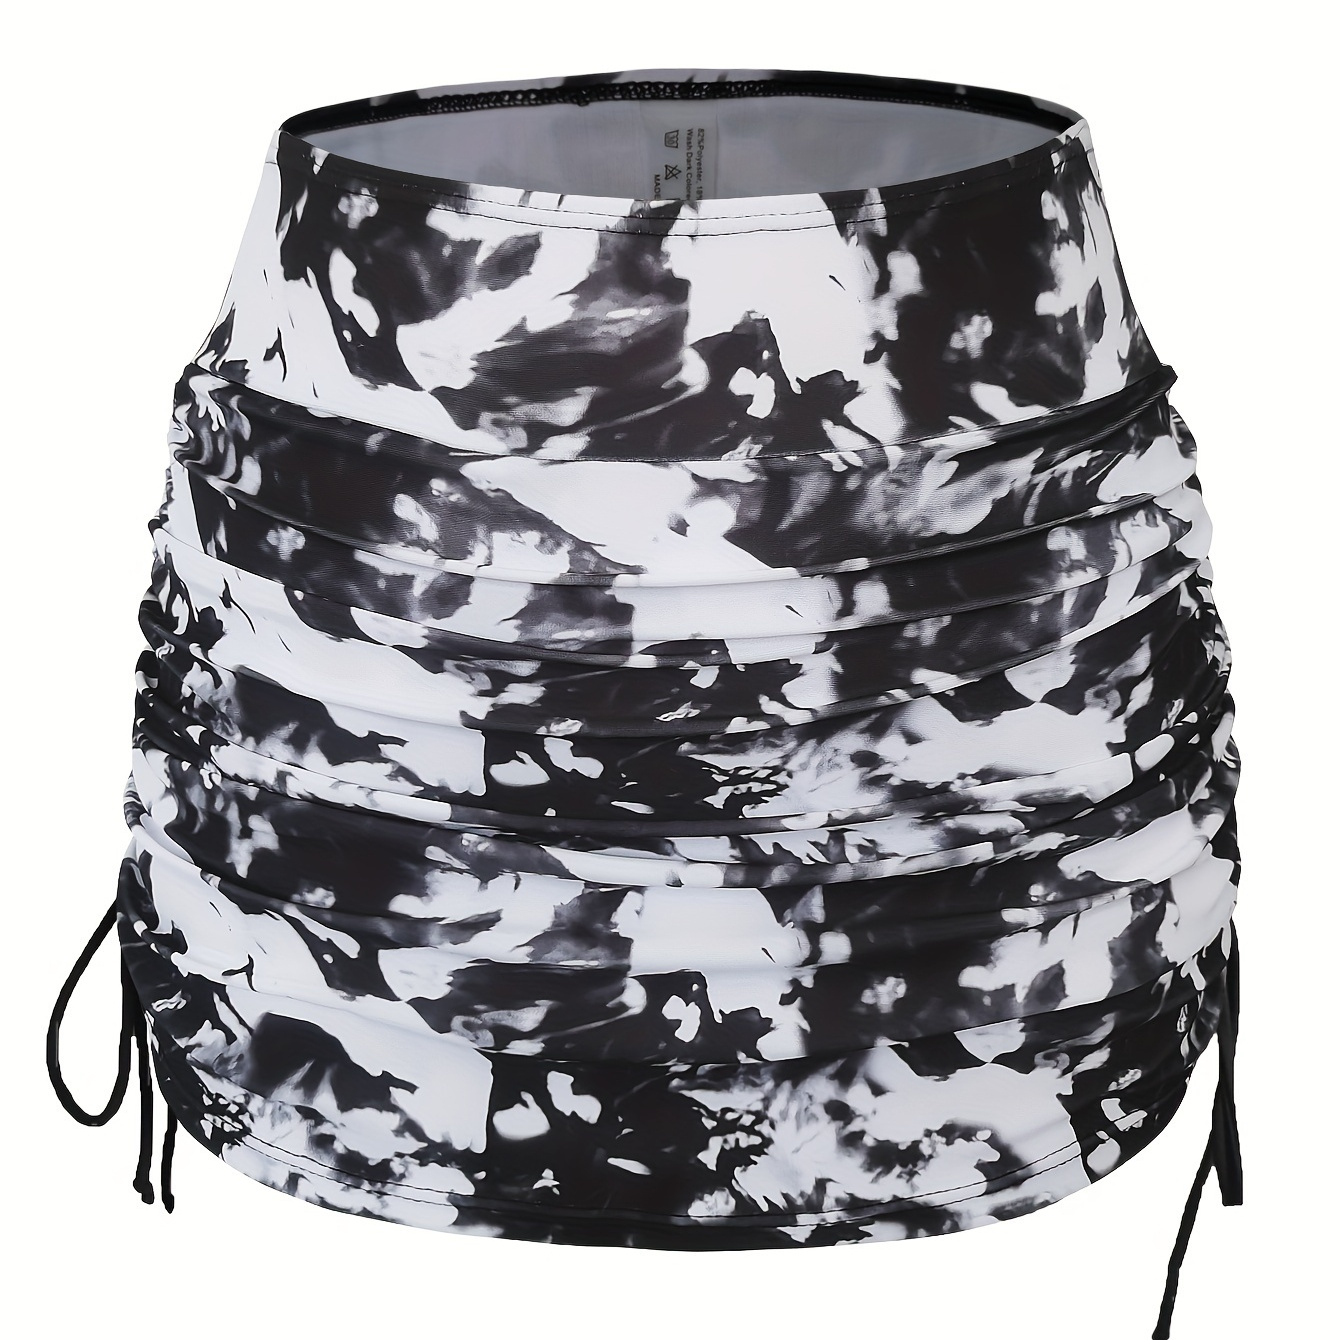 

Women's High-waisted Ruched Skirted Swim Bottoms With Drawstring, Black And White Tie-dye Swimwear Skorts